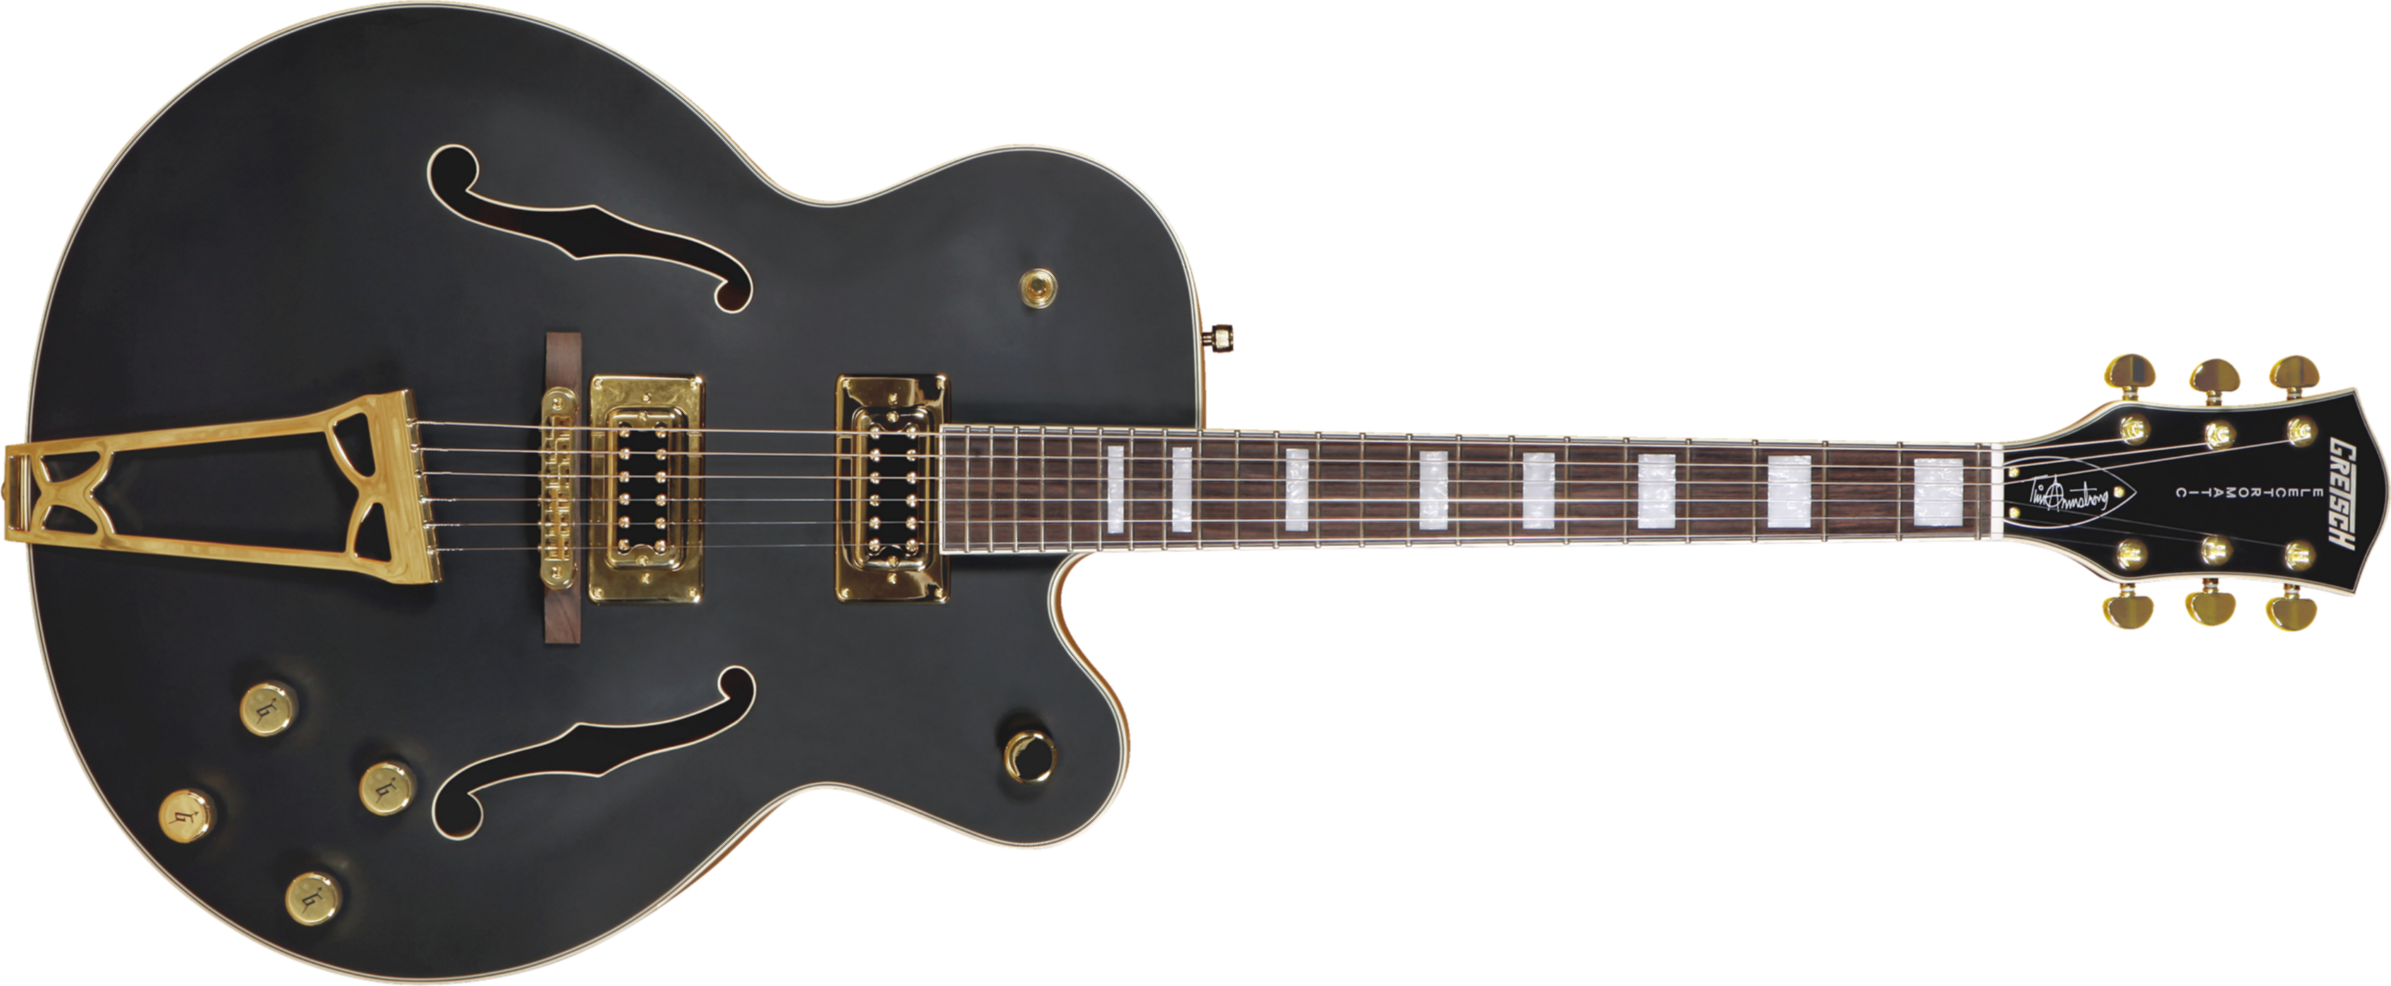 Gretsch Tim Armstrong G5191bk Electromatic Hollow. Black Satin - Hollow-body electric guitar - Main picture